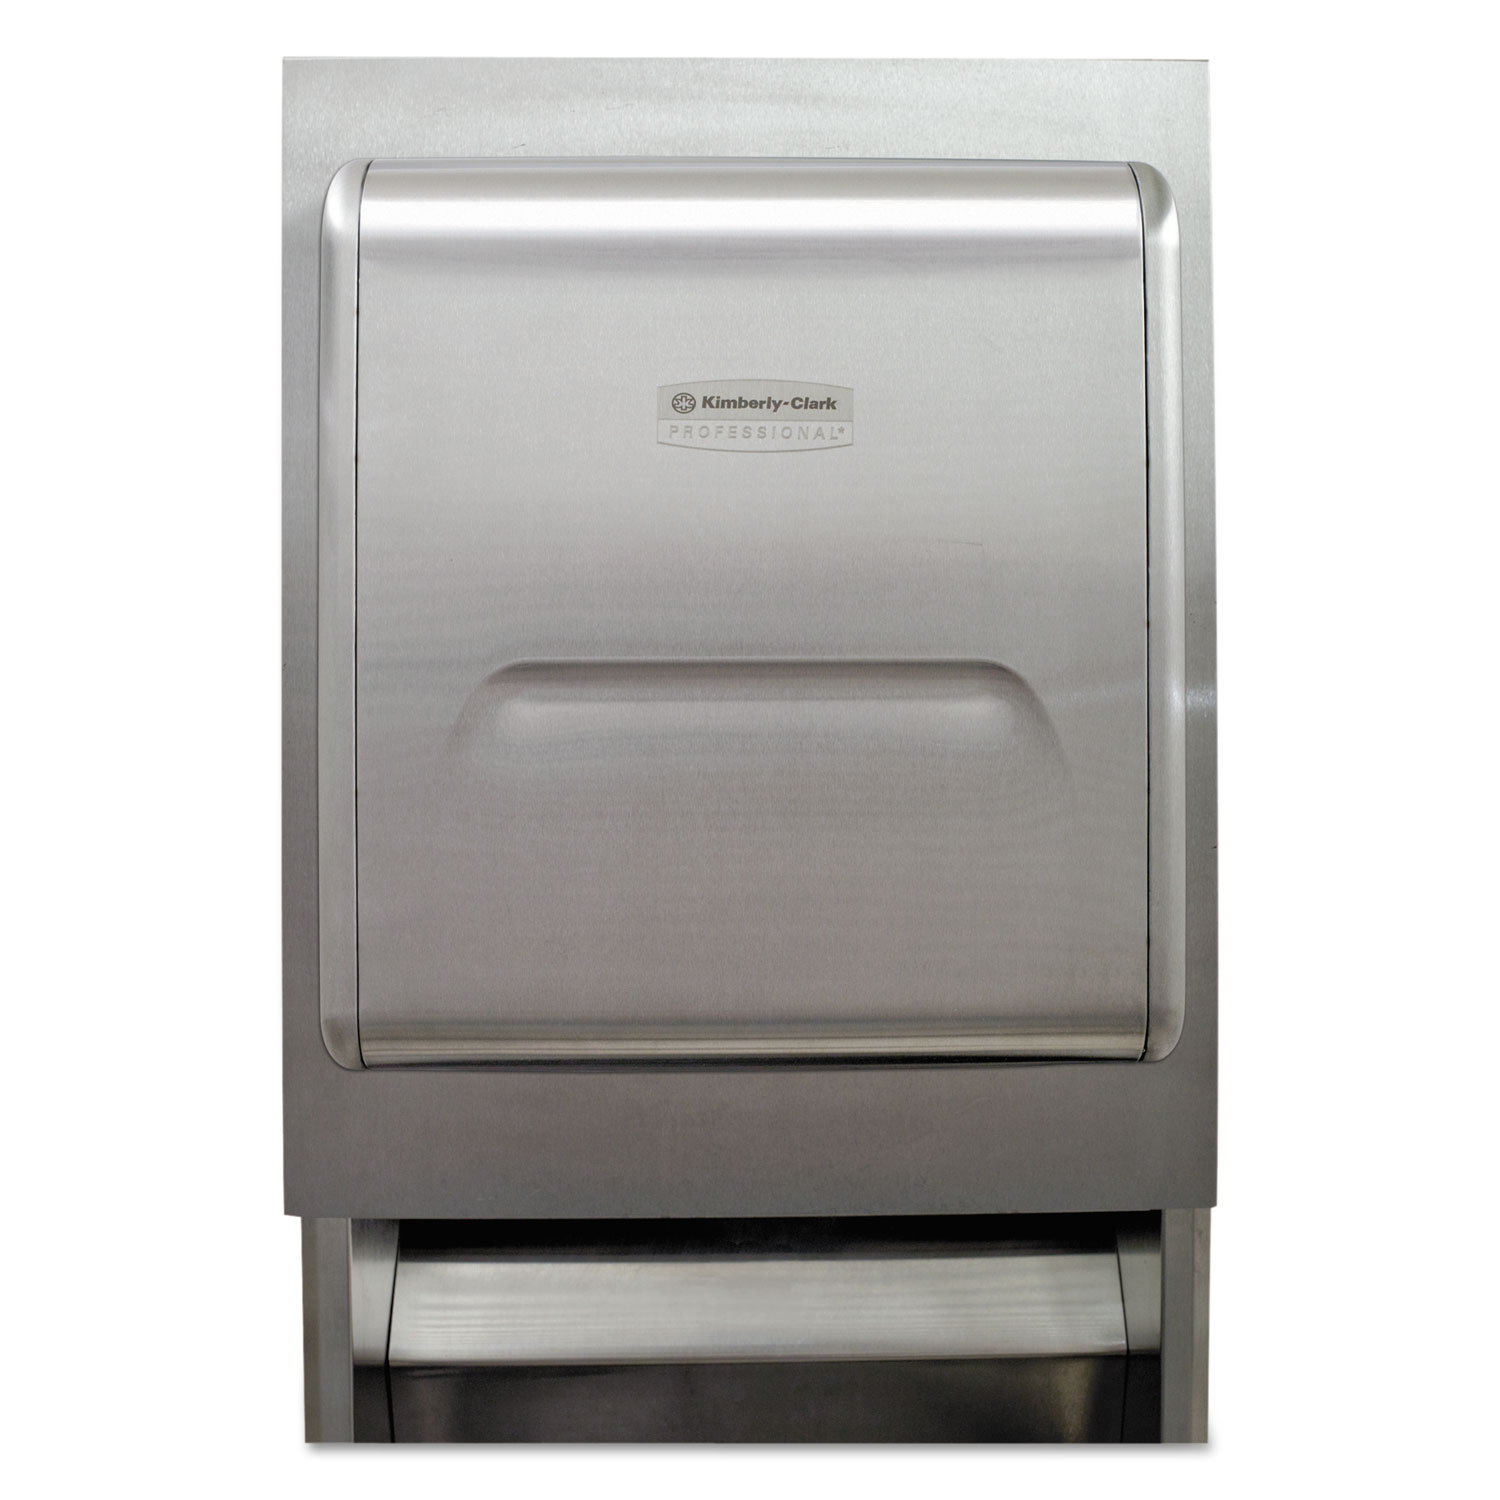 Kimberly-Clark Professional* MOD Recessed Dispenser Housing with Trim Panel, 11.13 x 4 x 15.37, Stainless Steel